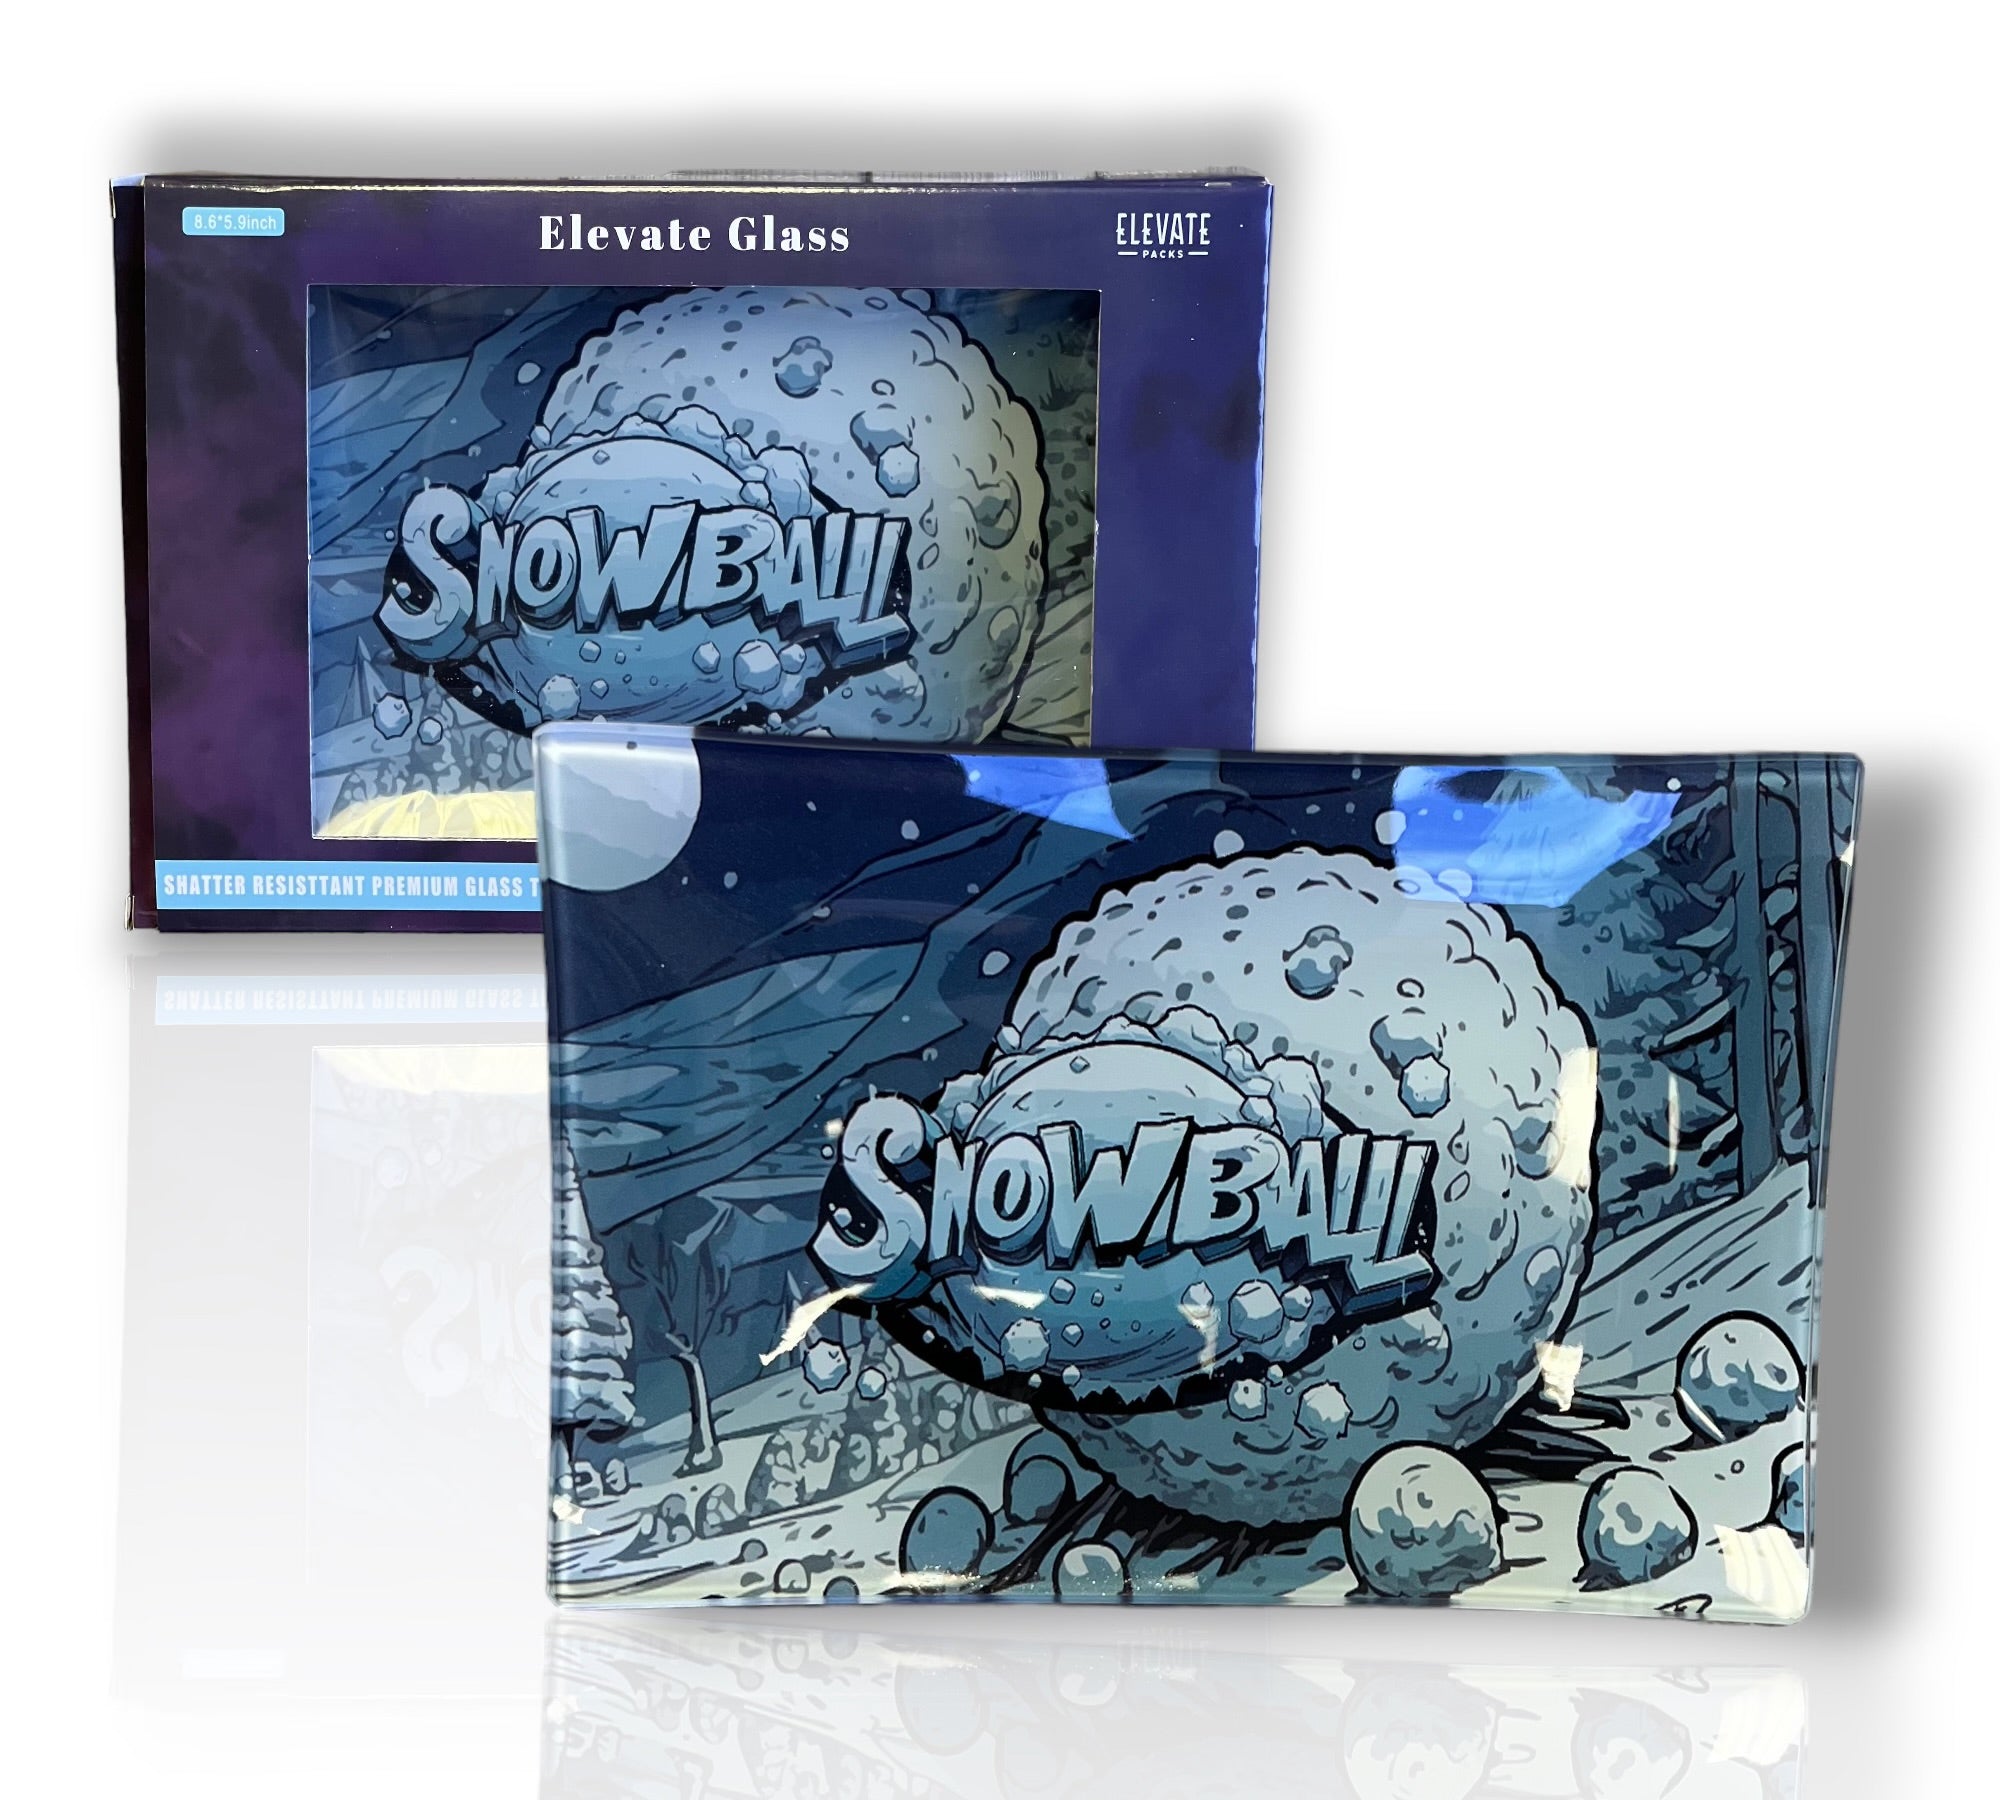 Snowball Elevate Glass Shatter Resistant Rolling Tray